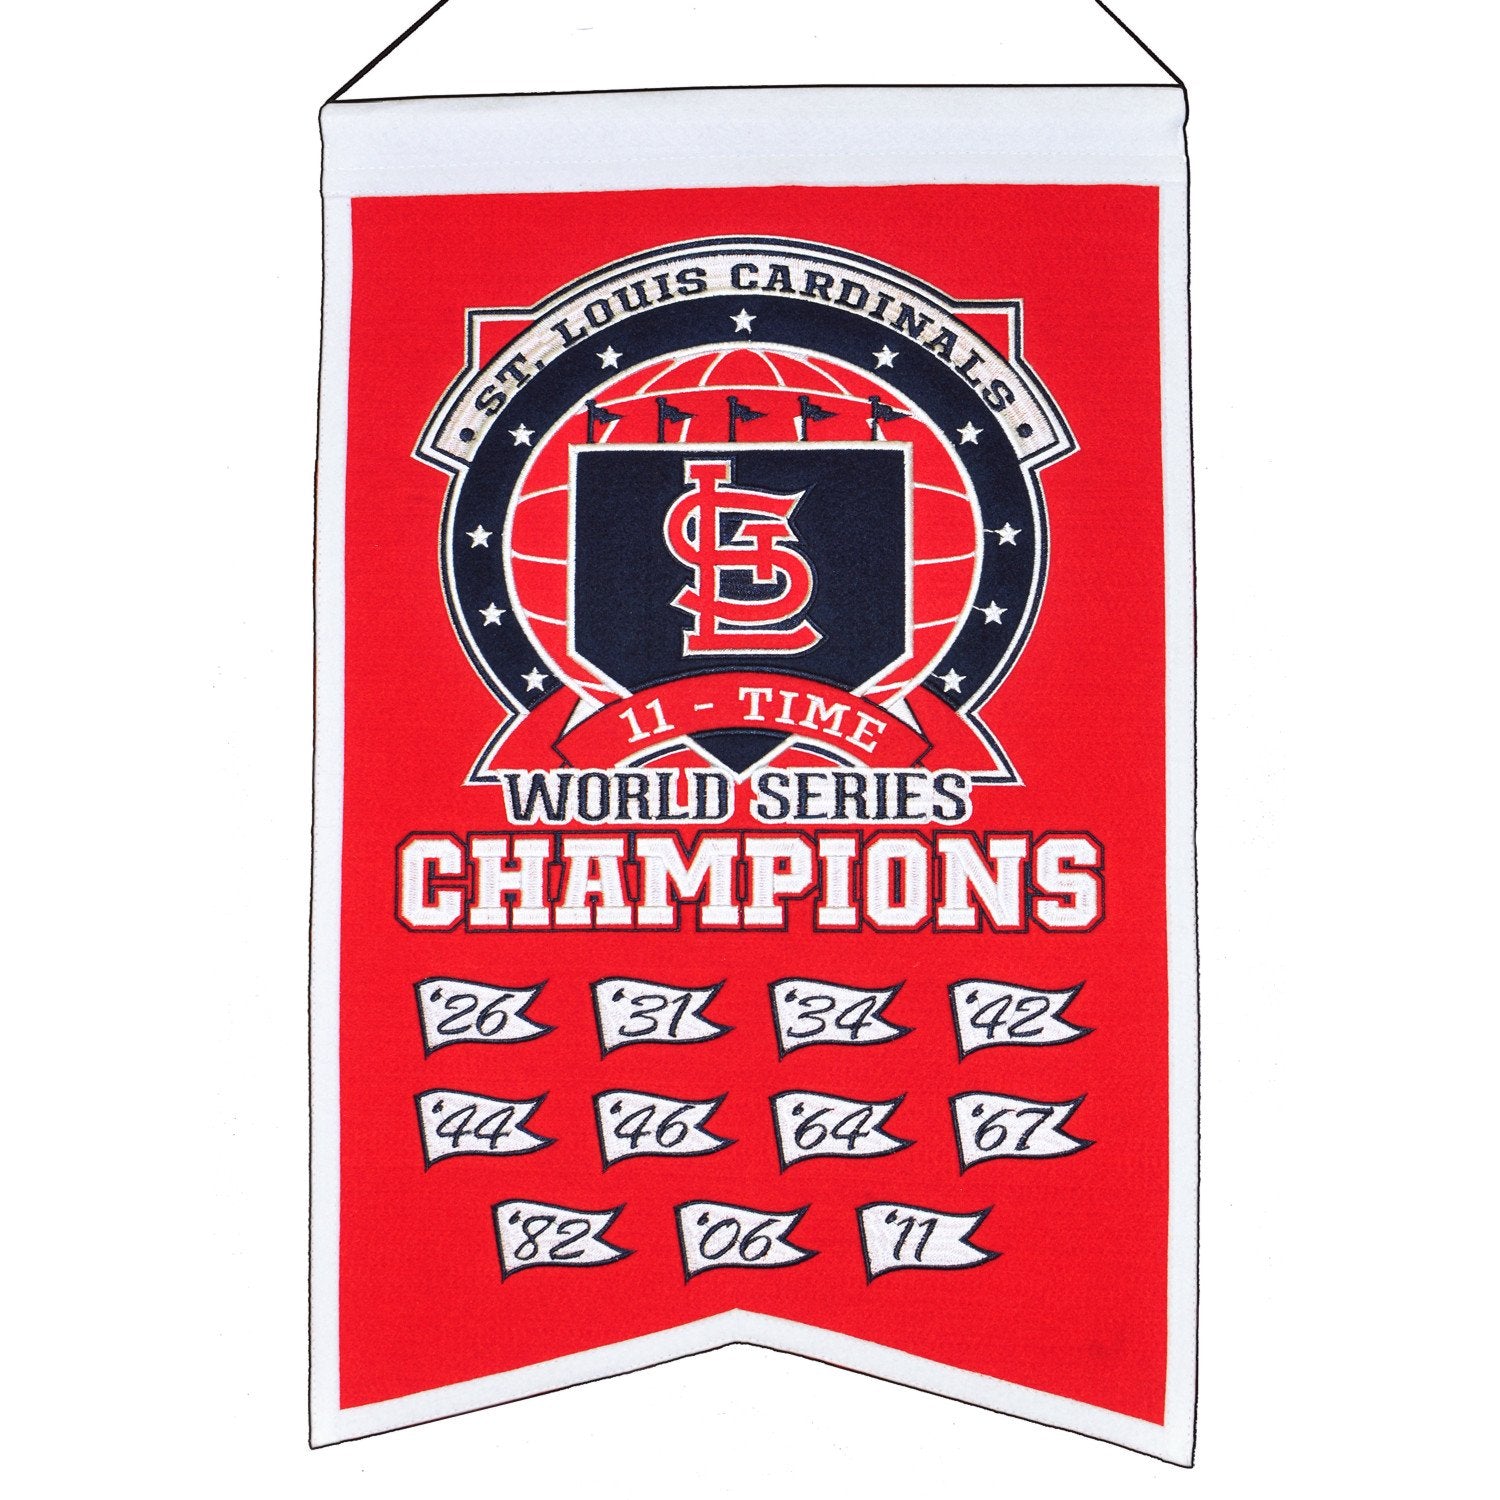 St. Louis Cardinals 11 Time World Series Champions Banner - HeritageSportsBanners